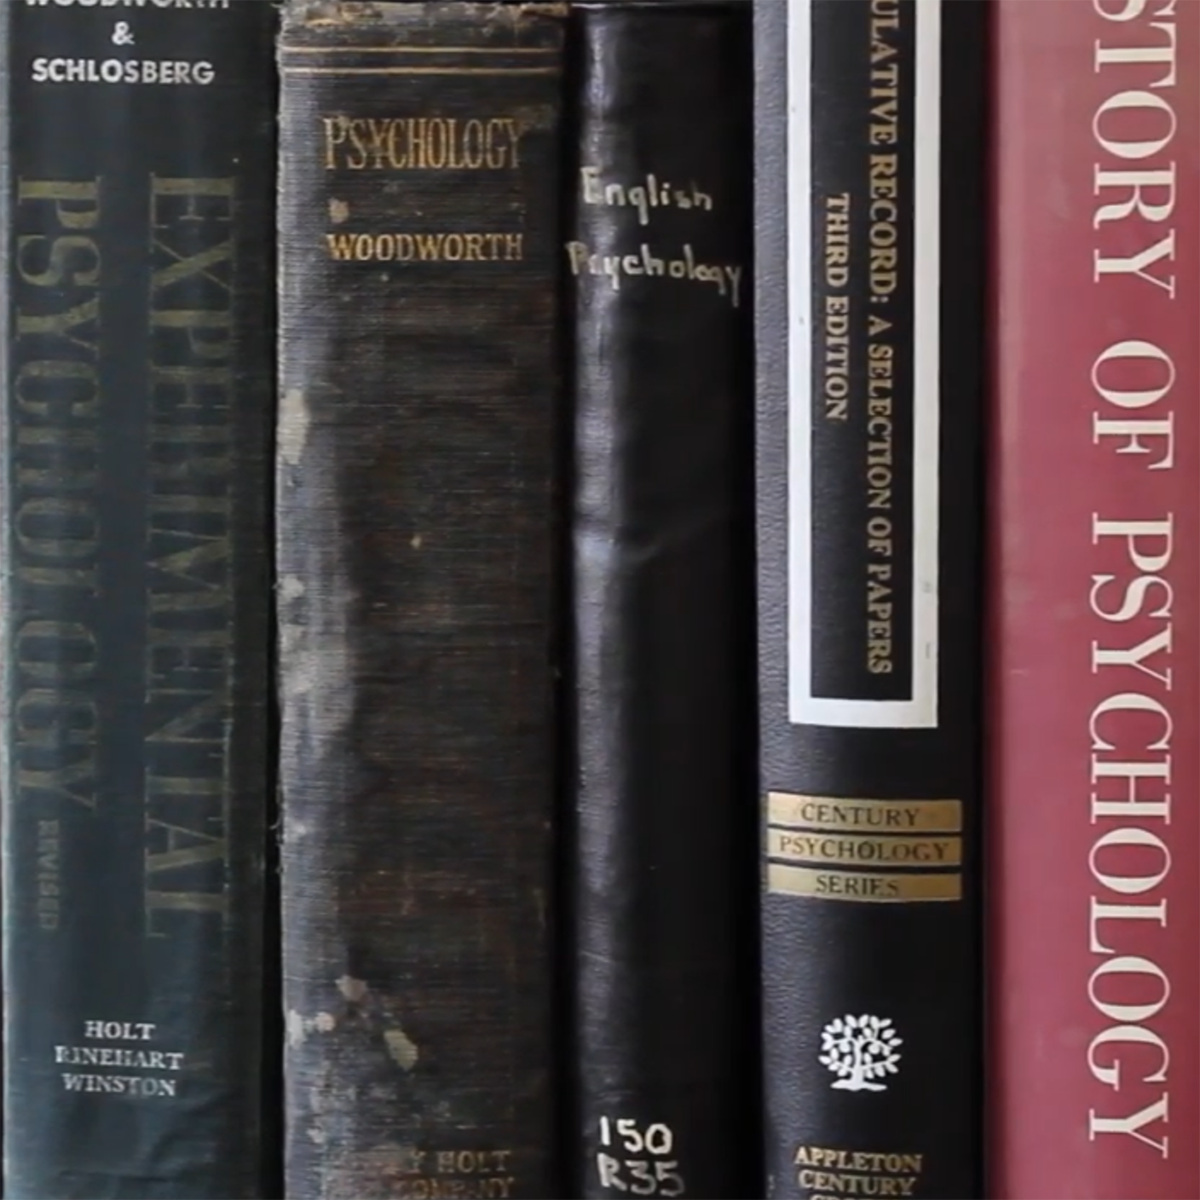 Close-up photo of philosophy book spines, on a shelf